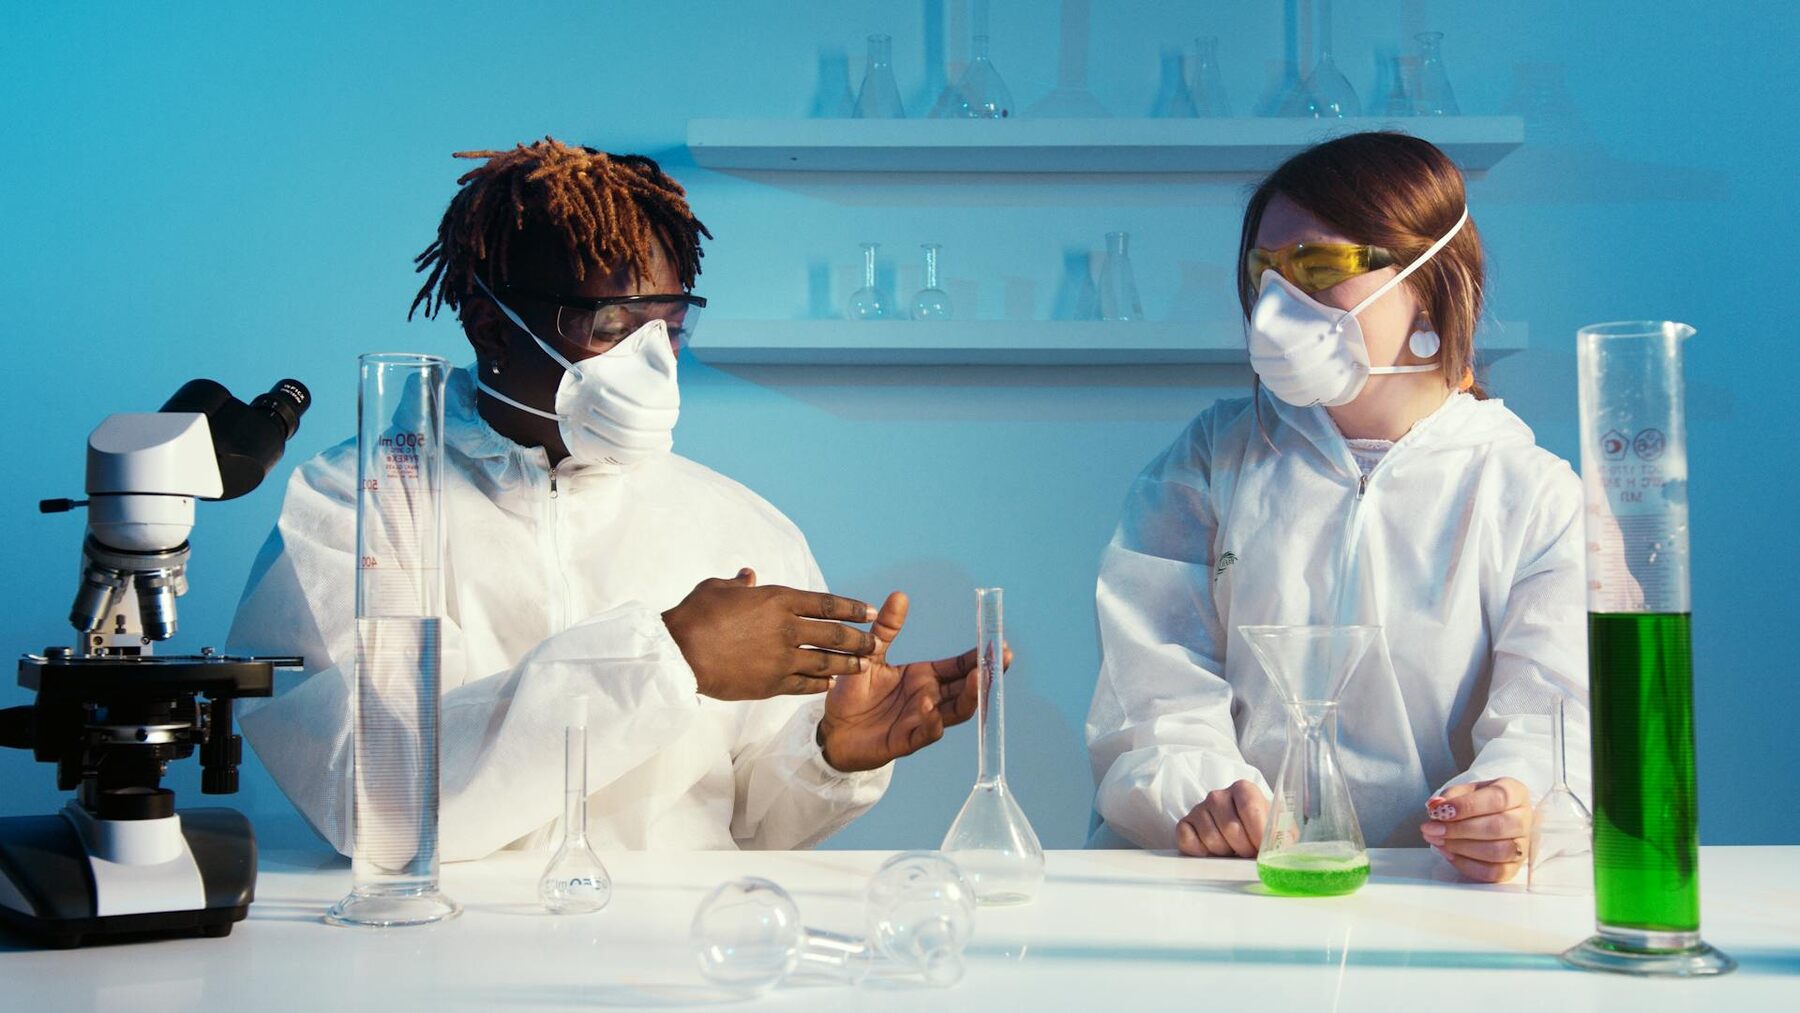 Two researchers in protective gear collaborating on a scientific project